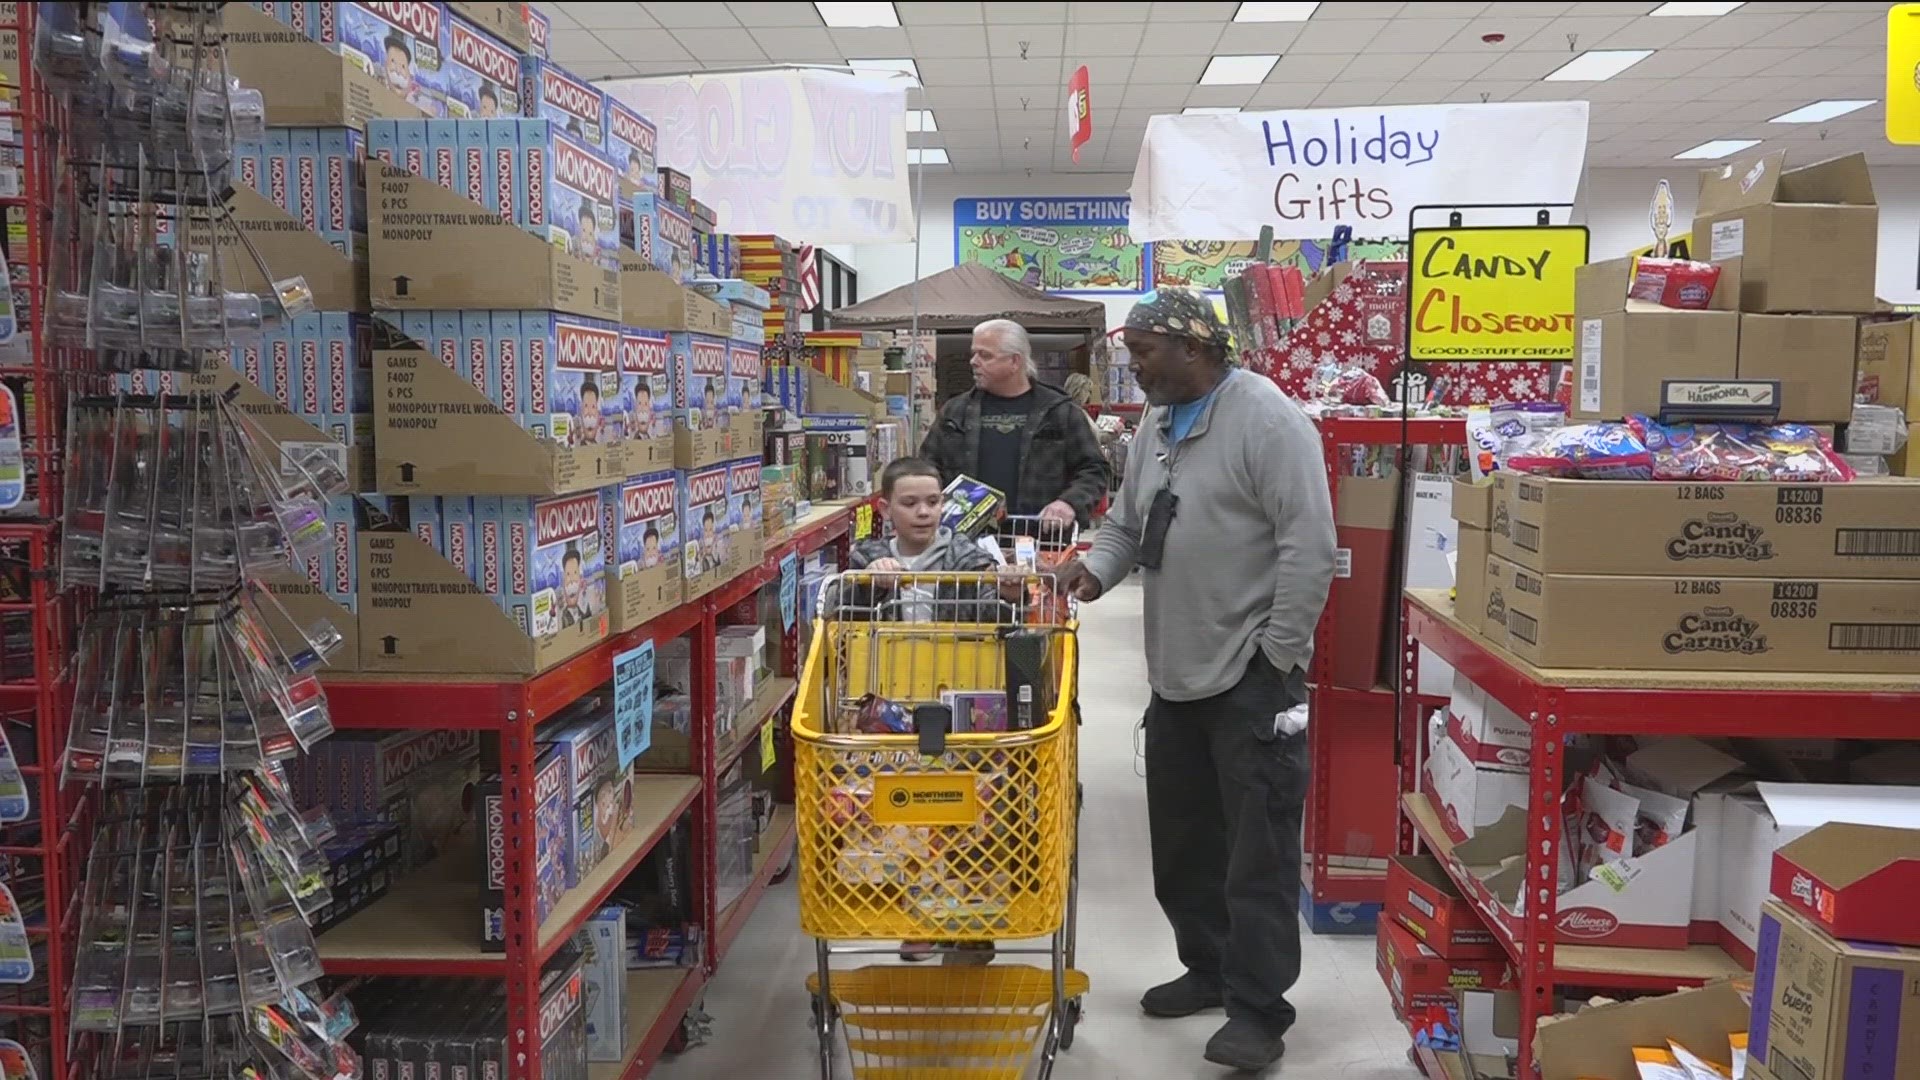 One of the biggest donors for Gift of Joy is a group of city employees who practically plan all year for it. WTOL 11 followed them on their shopping trip.